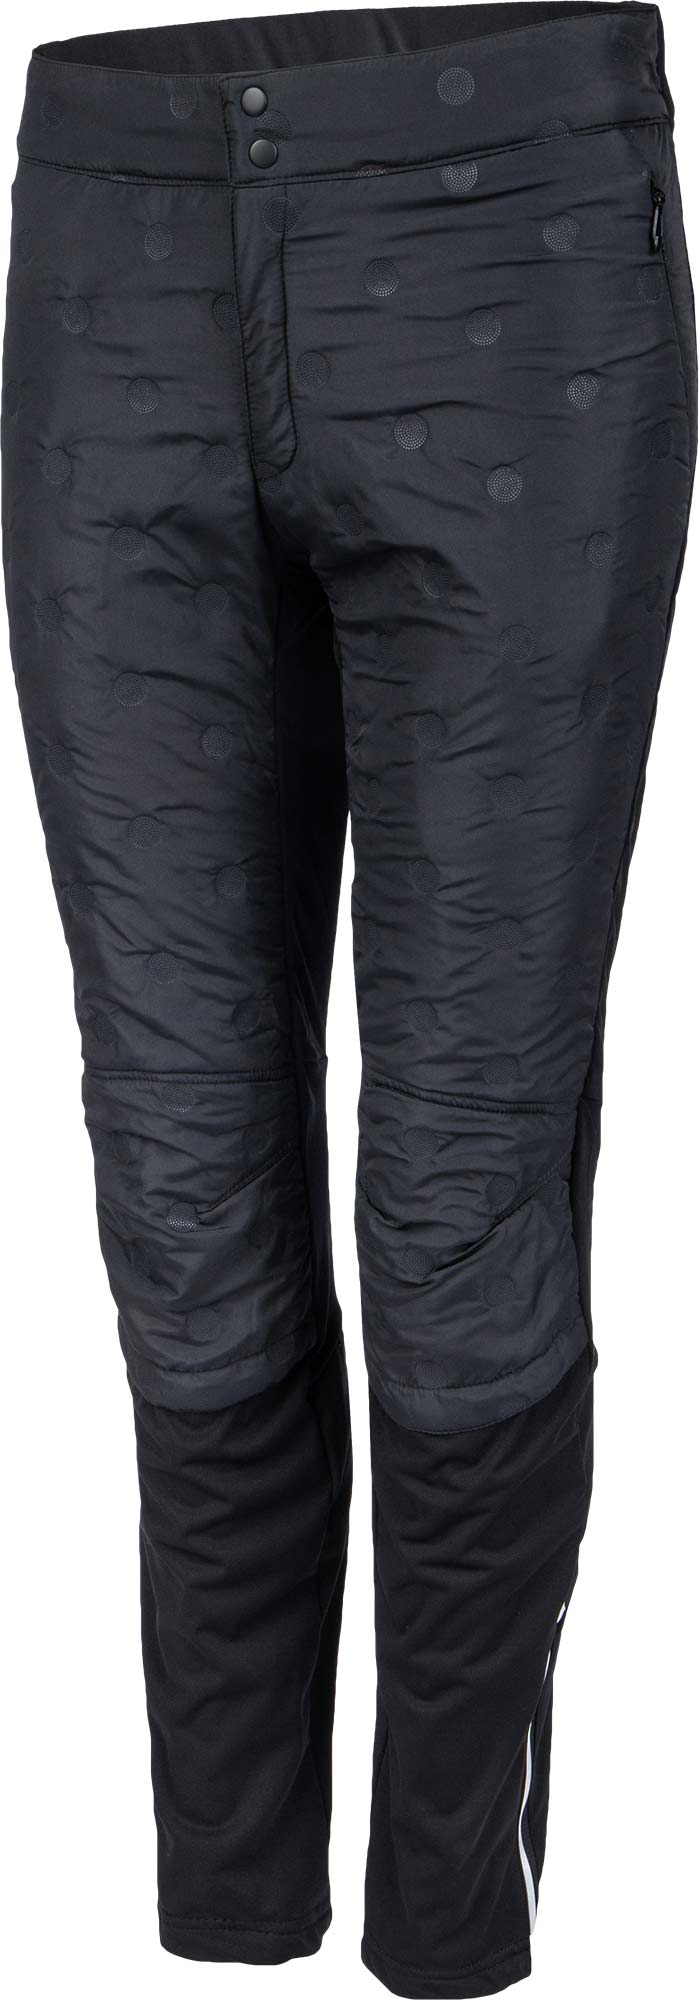 Quilted winter trousers